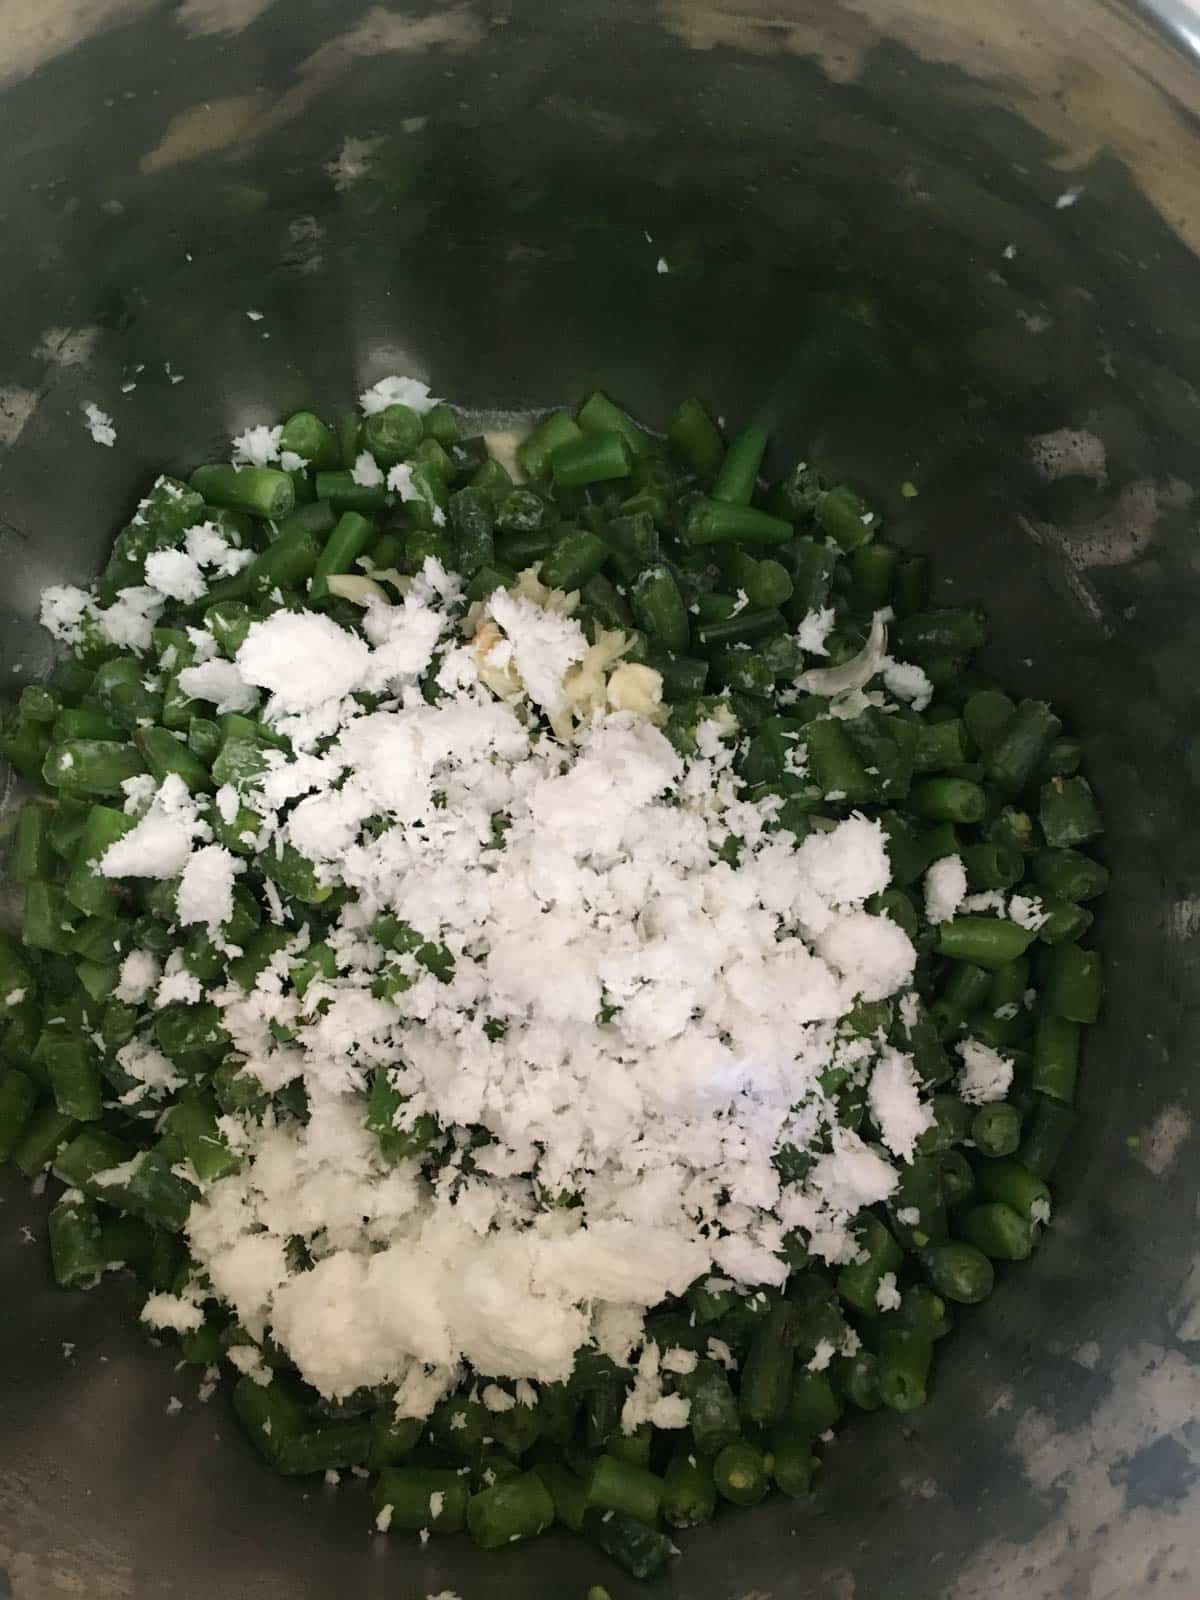 Green beans along with grated coconut in an Instant Pot